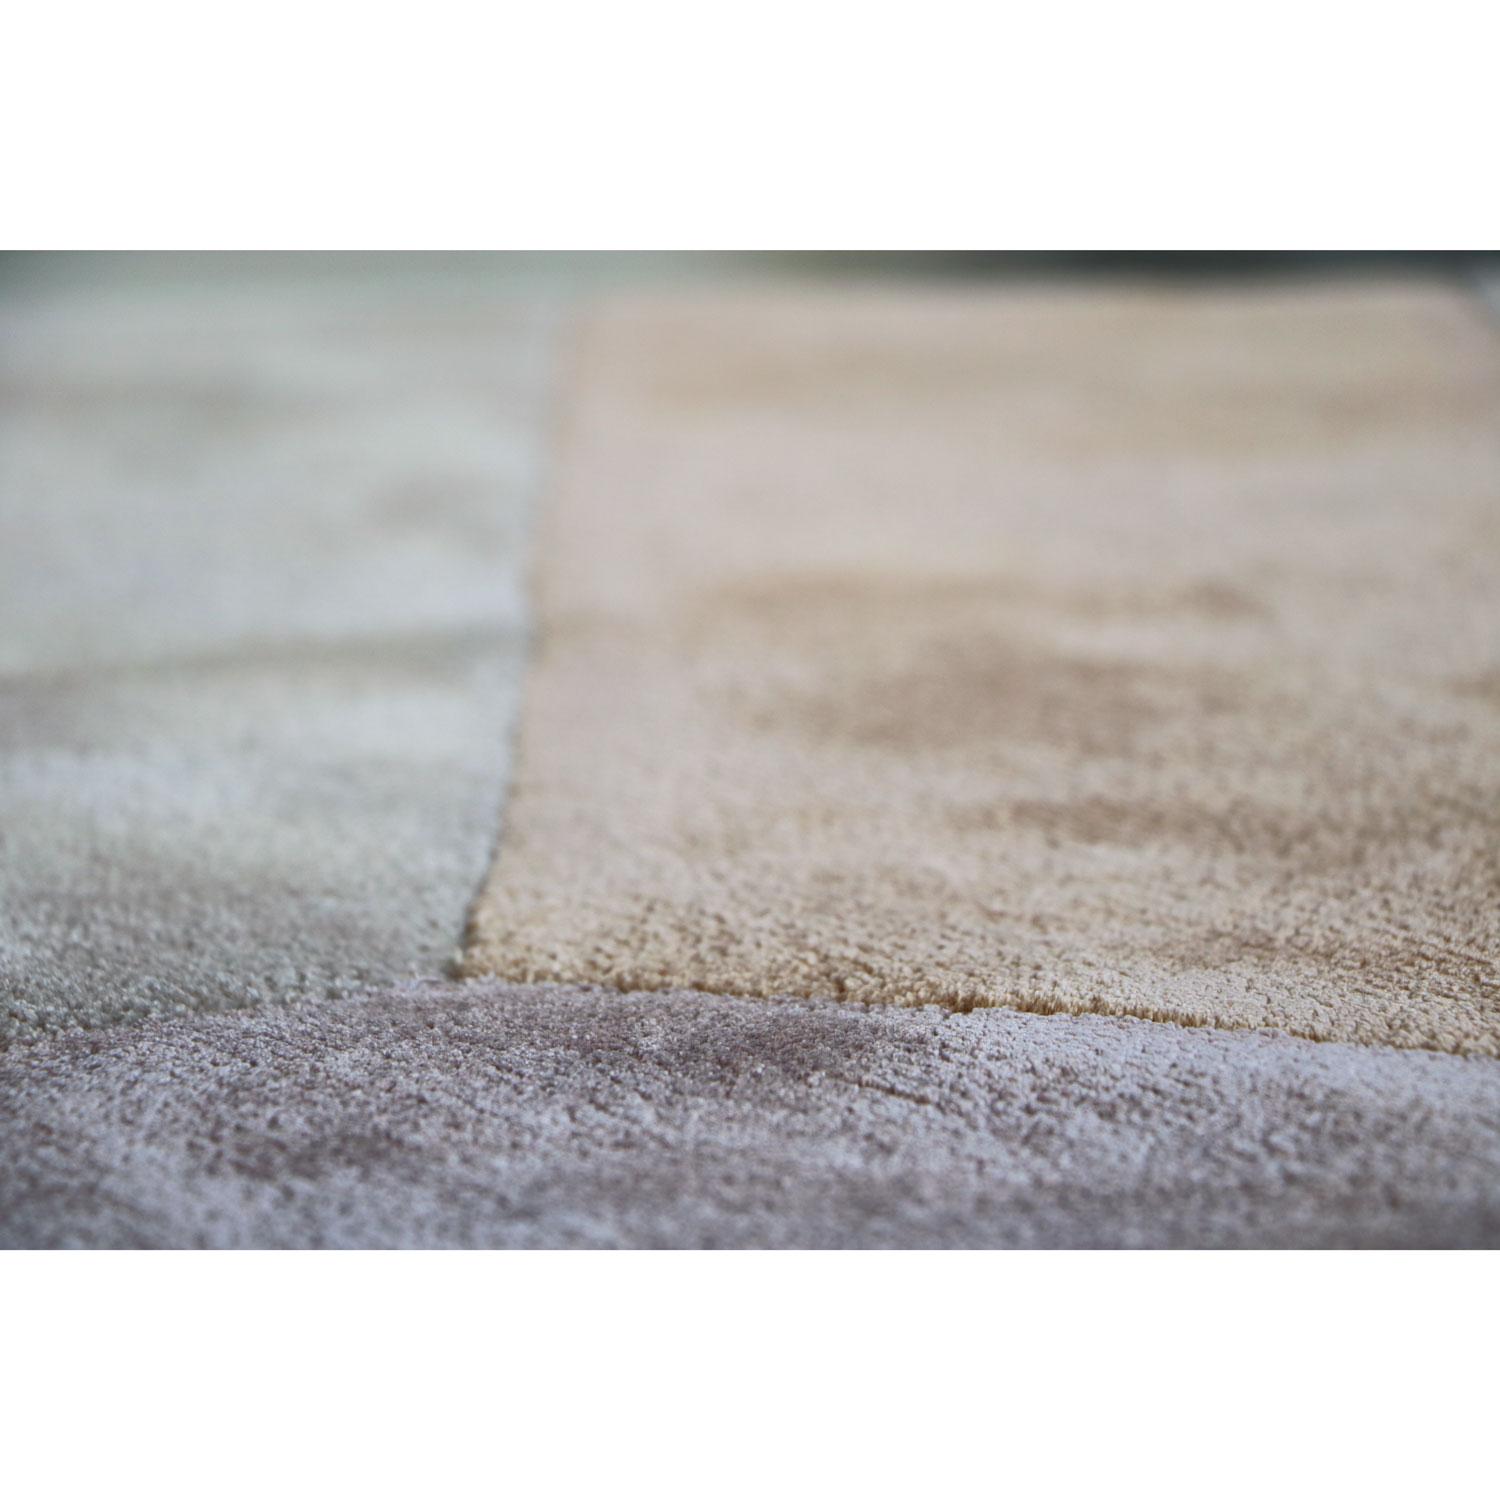 Indian Modern Organic Shape Sustainable Soft Beige Rug by Deanna Comellini 220x260 cm For Sale